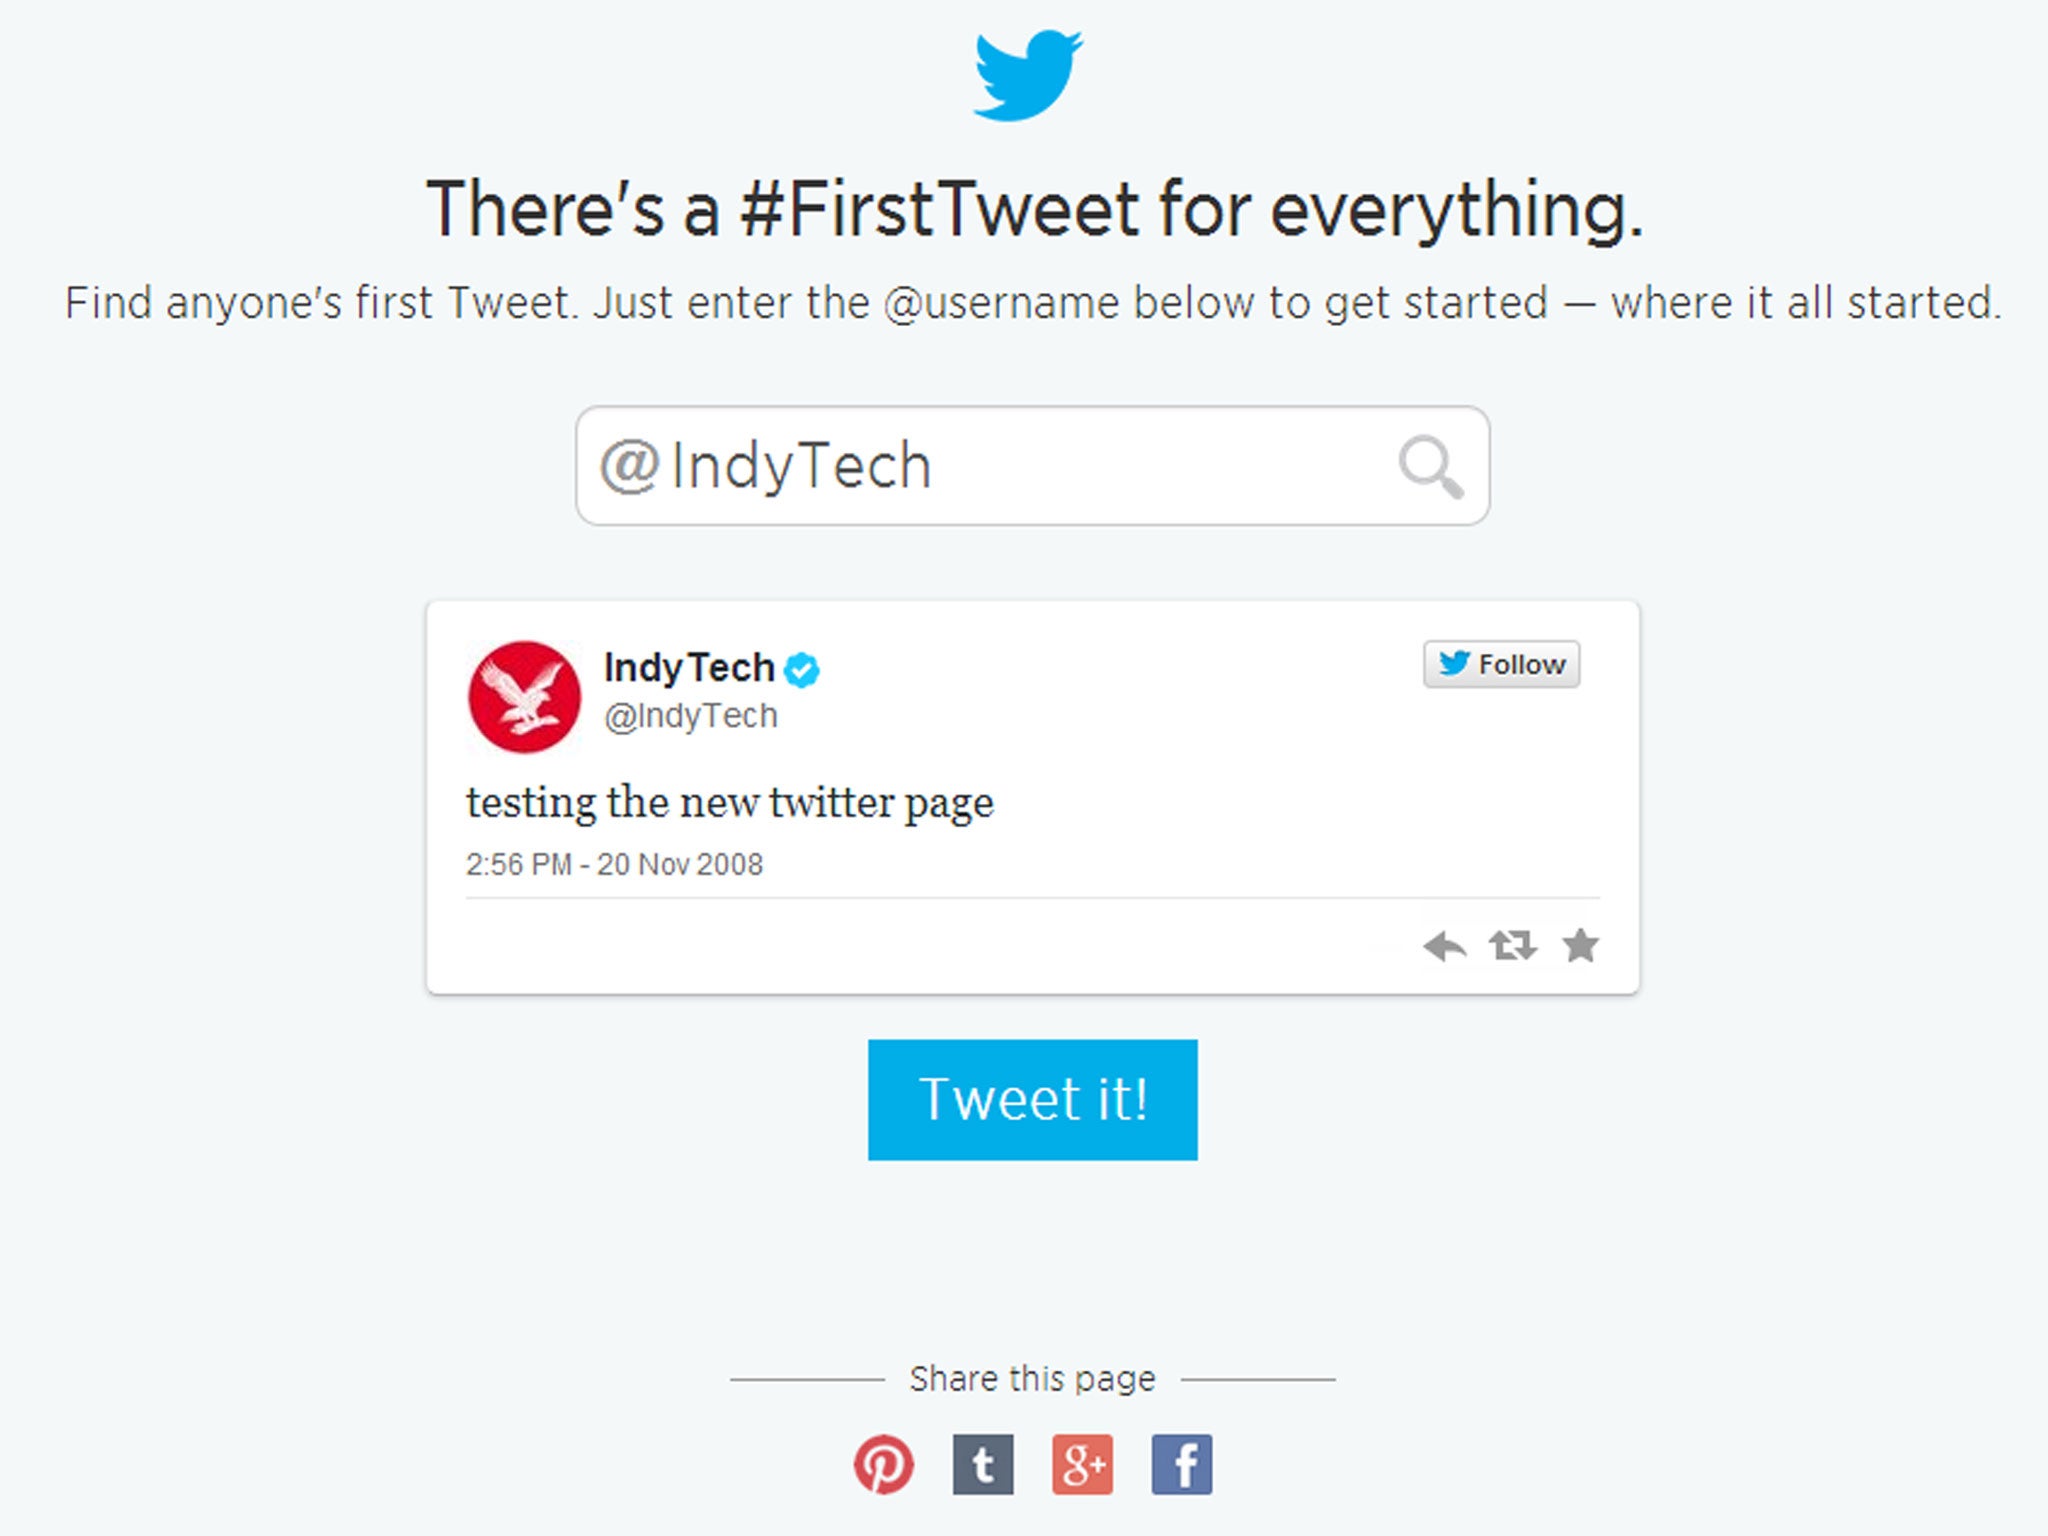 IndyTech's first tweet: not much in terms of content, but we're quite happy with getting onboard in 2008.